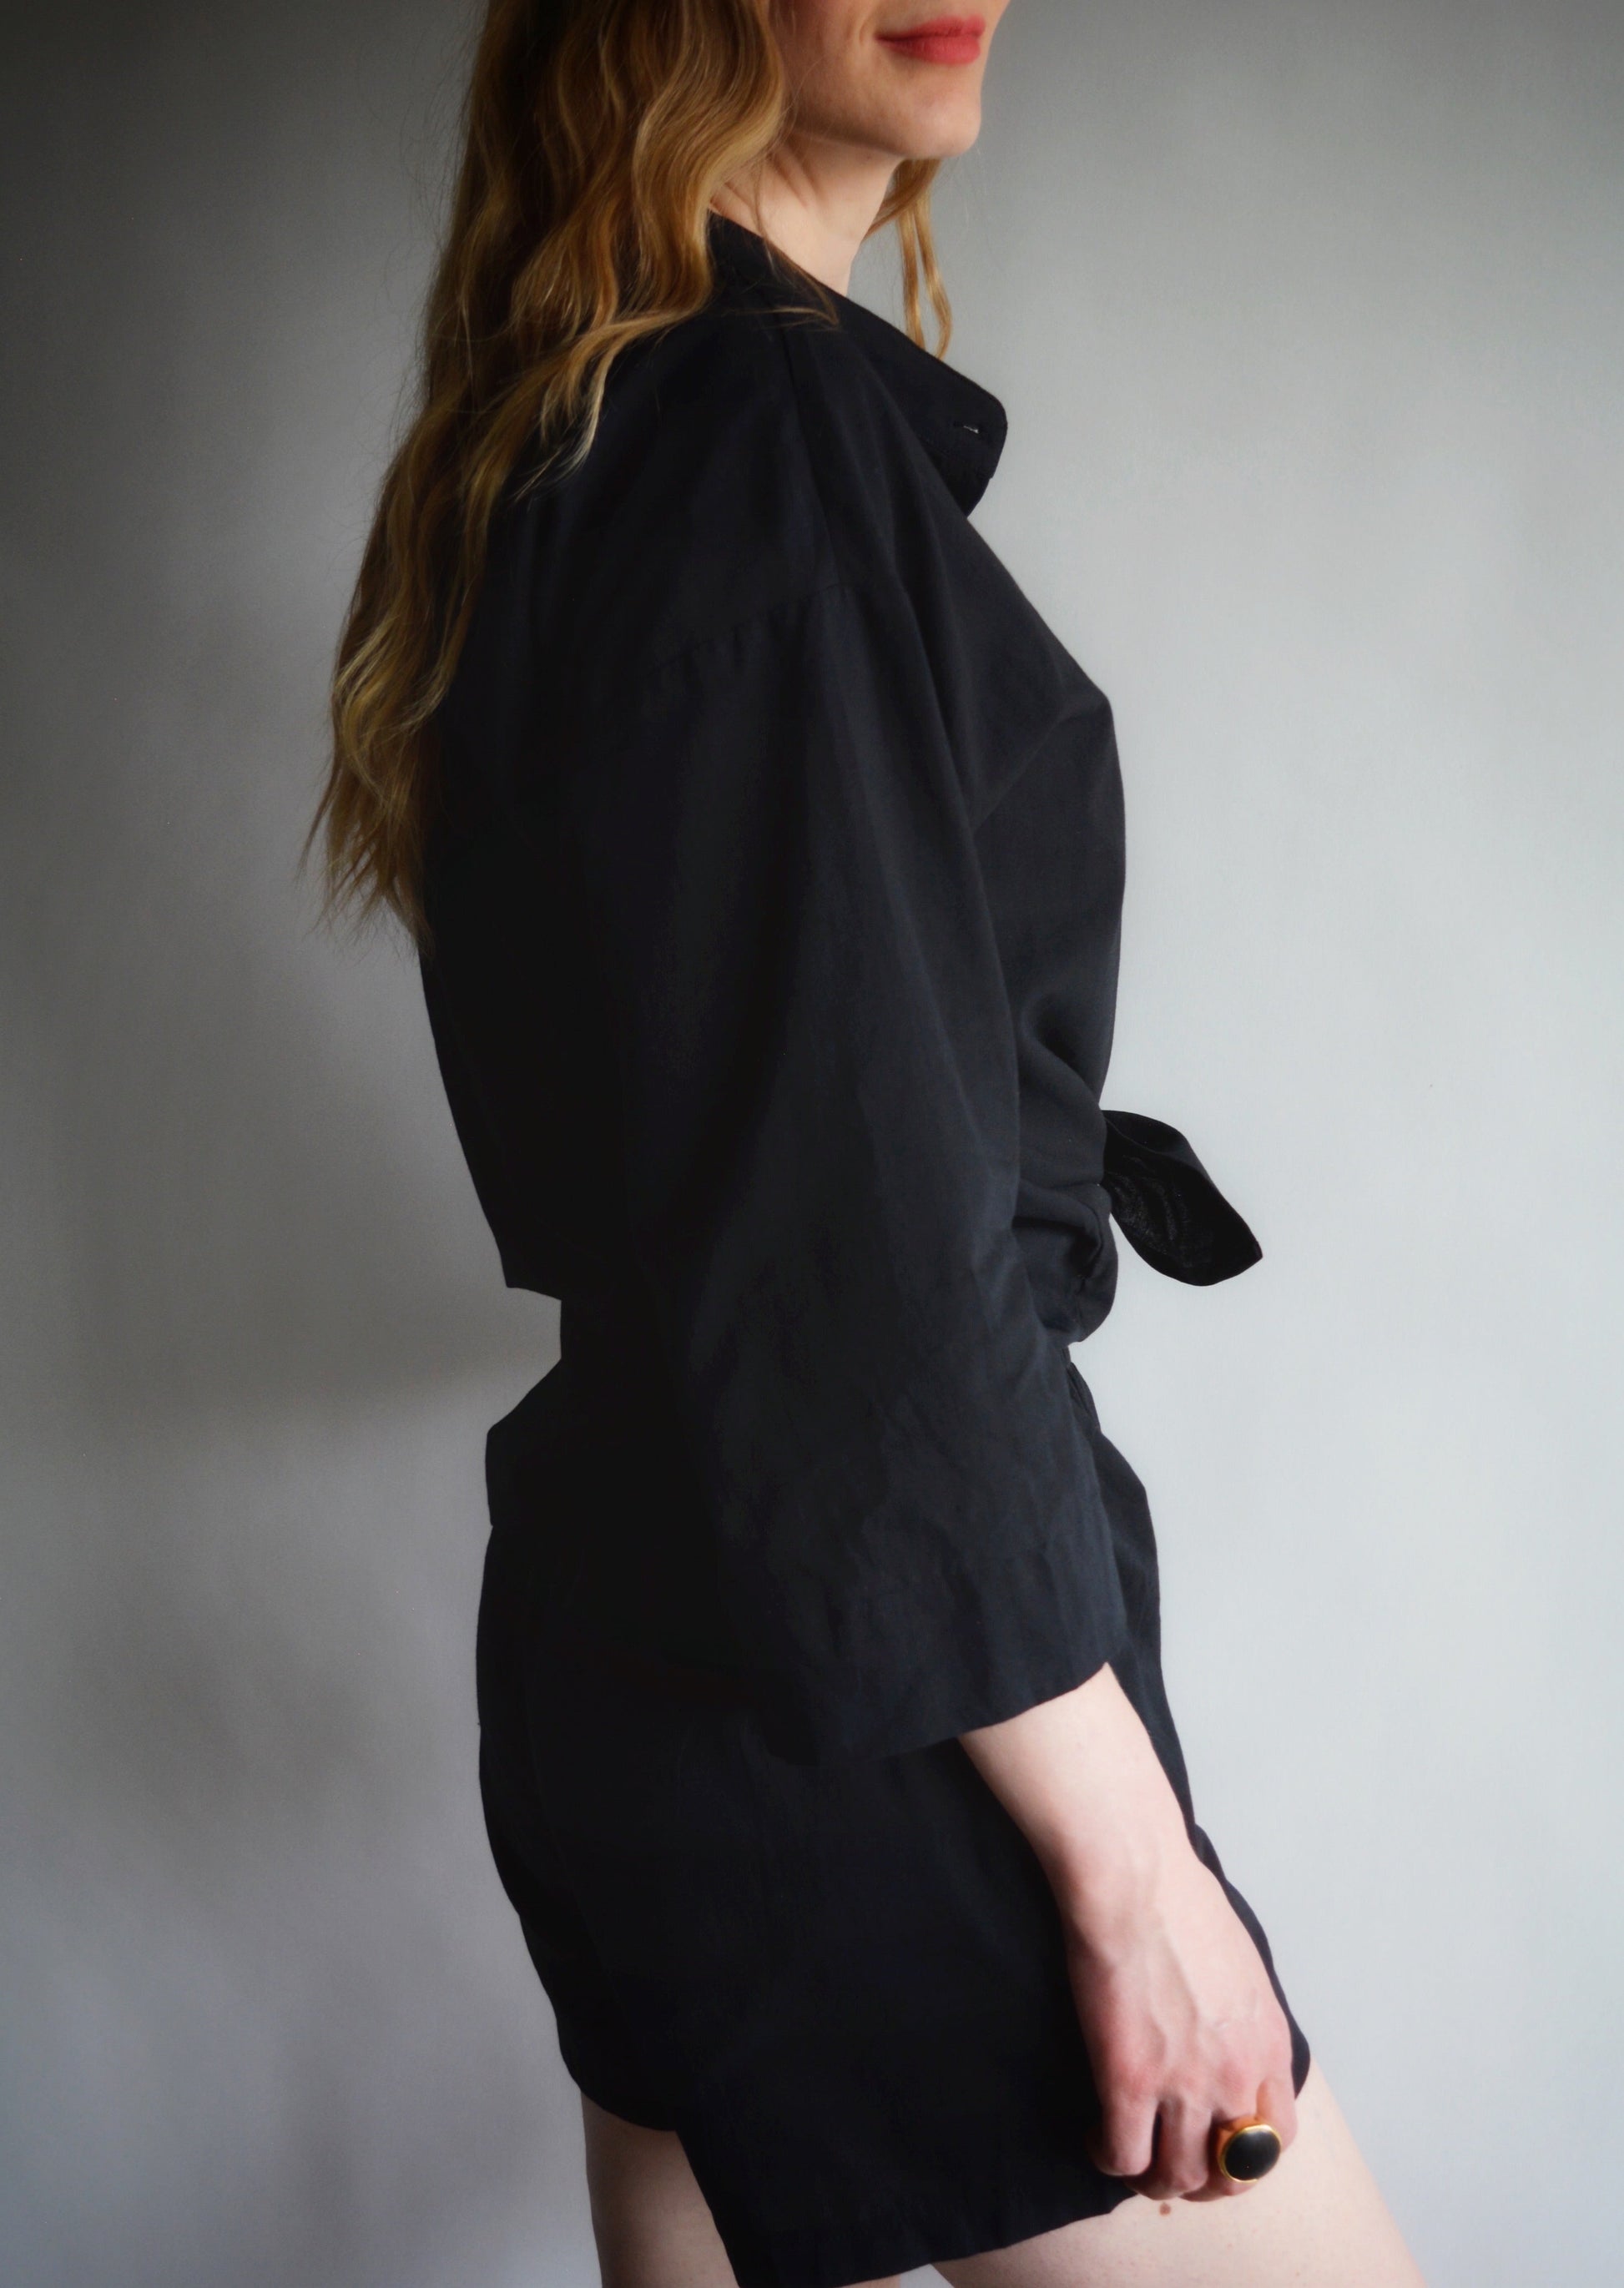 Two Piece Set - Cotton Shirt and Shorts in black color